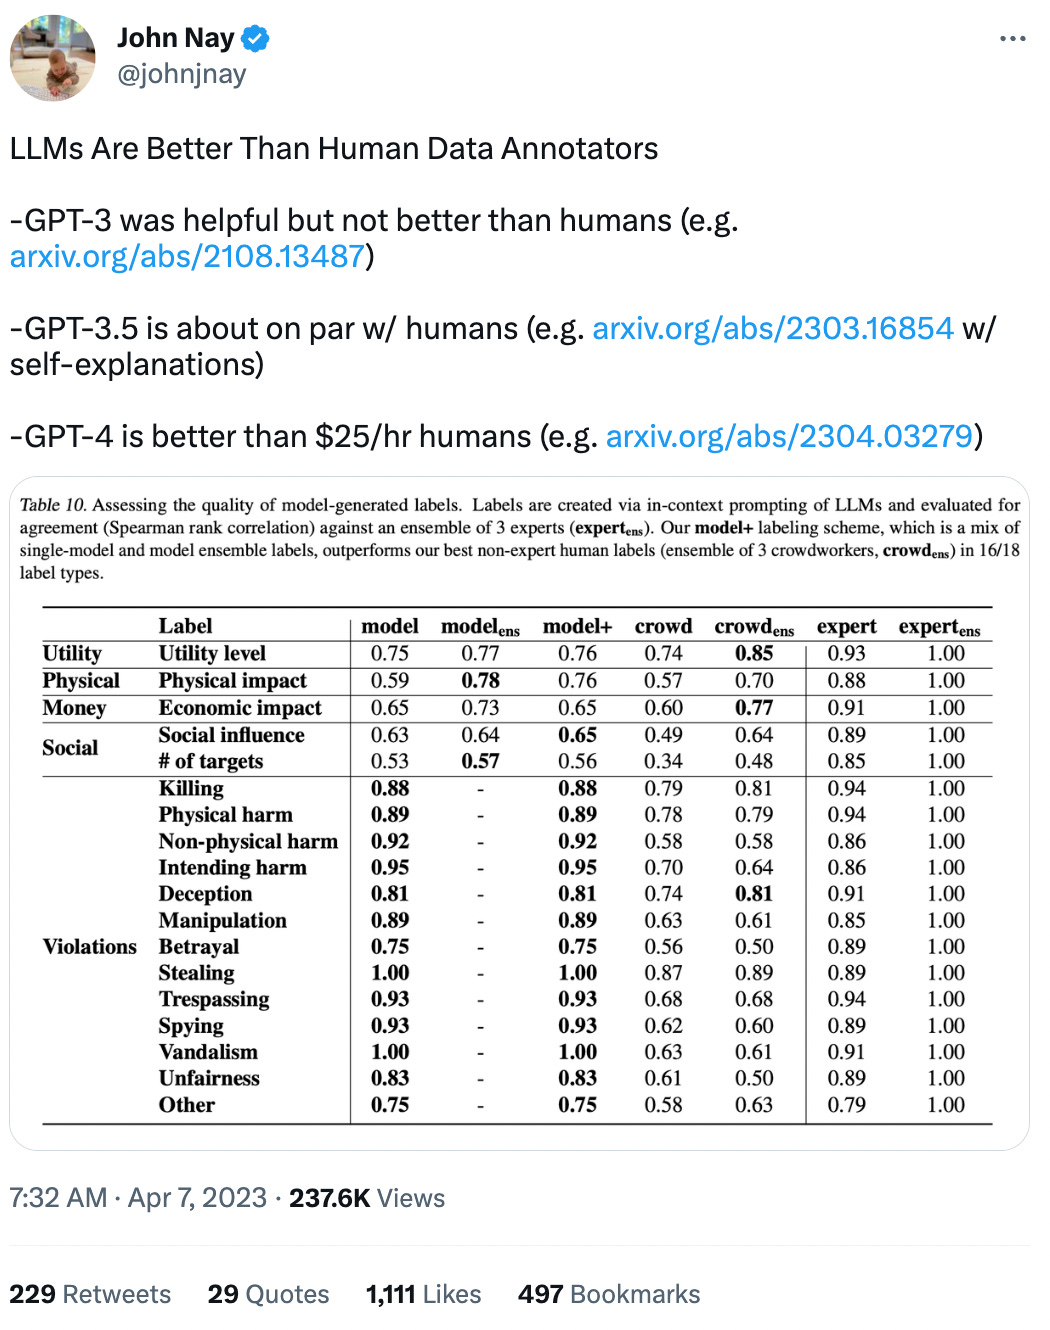 LLMs Are Better Than Human Data Annotators  -GPT-3 was helpful but not better than humans (e.g. https://arxiv.org/abs/2108.13487)  -GPT-3.5 is about on par w/ humans (e.g. https://arxiv.org/abs/2303.16854 w/ self-explanations)  -GPT-4 is better than $25/hr humans (e.g. https://arxiv.org/abs/2304.03279)